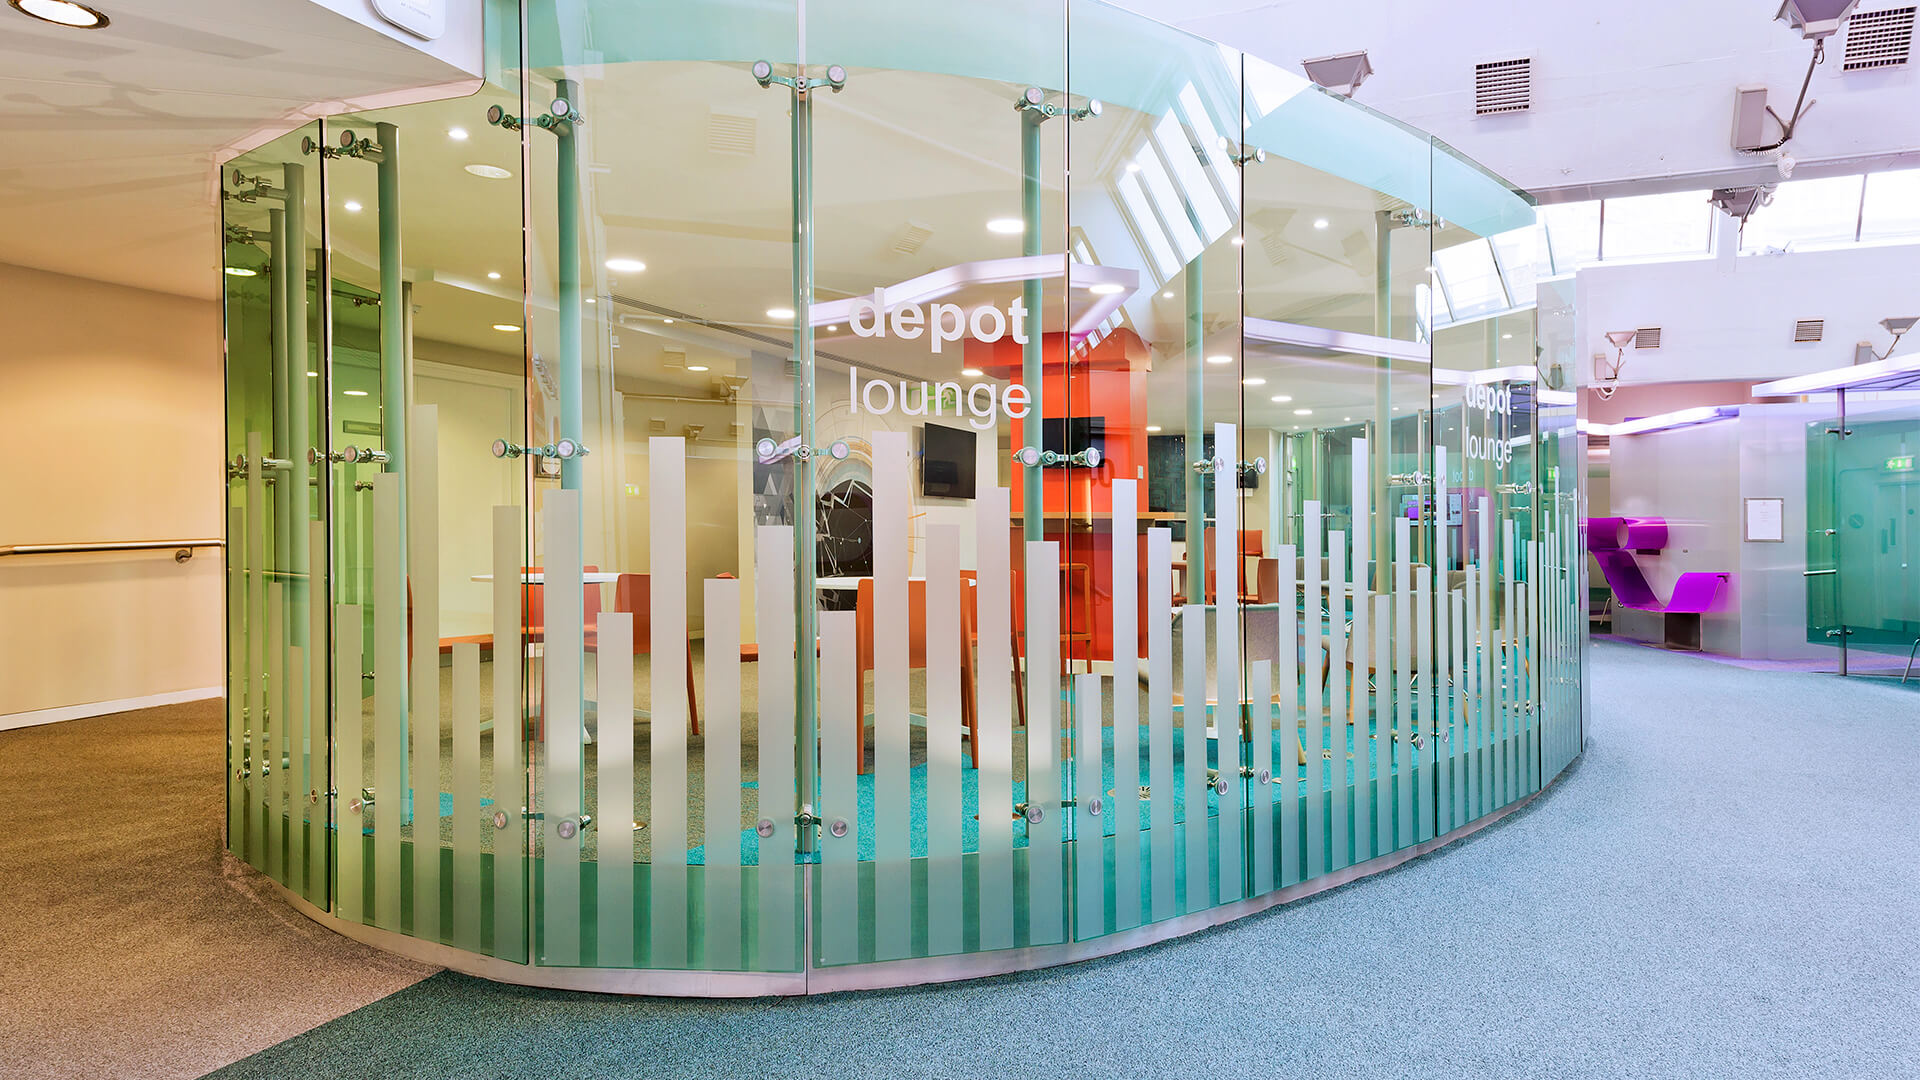 A curved glass wall with a decal reading "depot lounge" frames a bright seating area